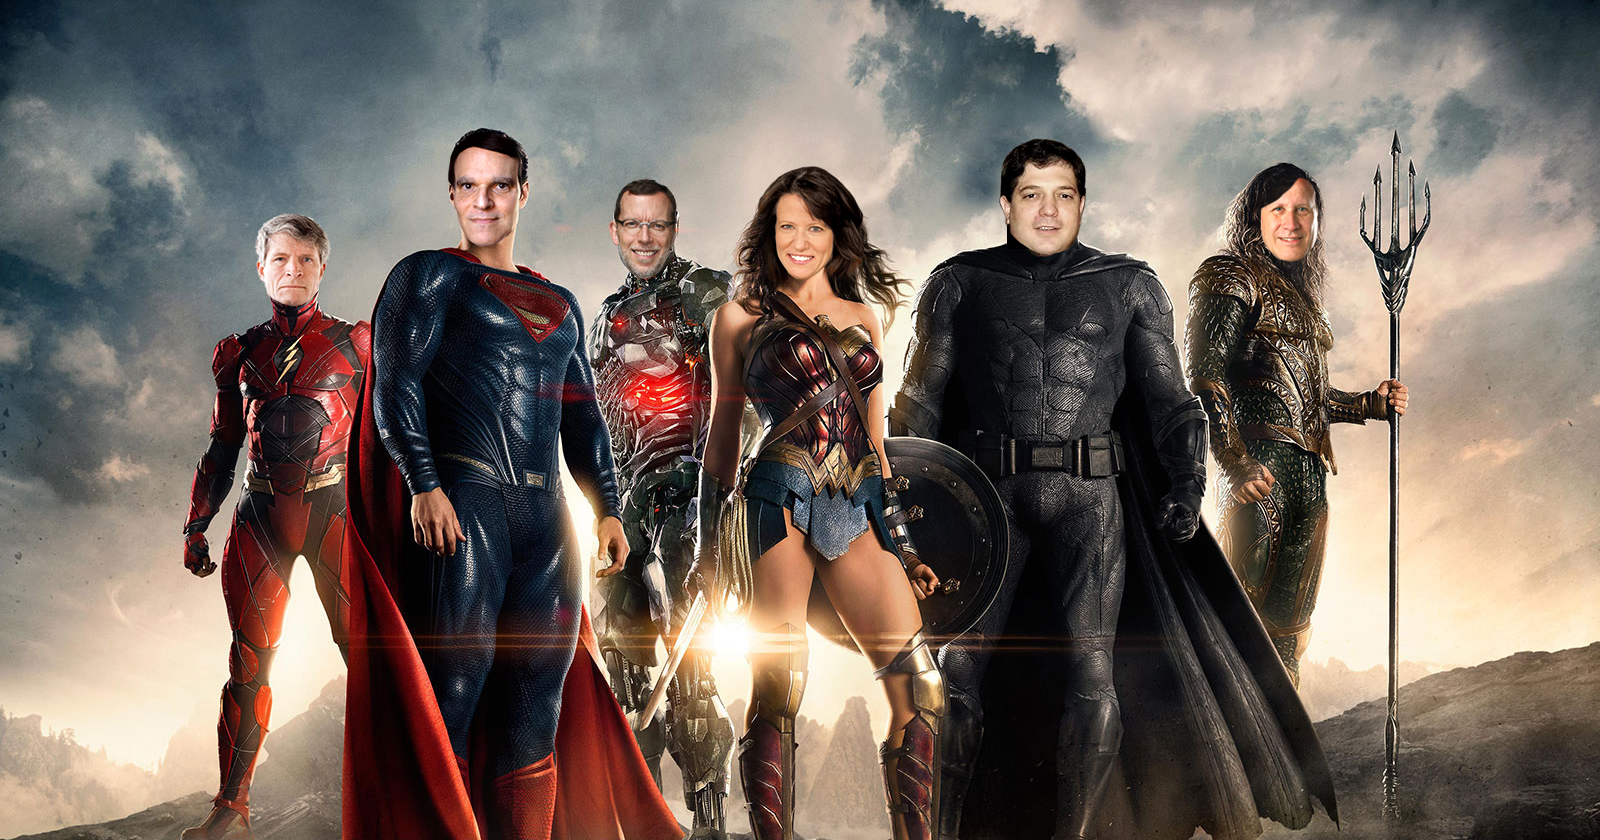 The Real-Life Justice League